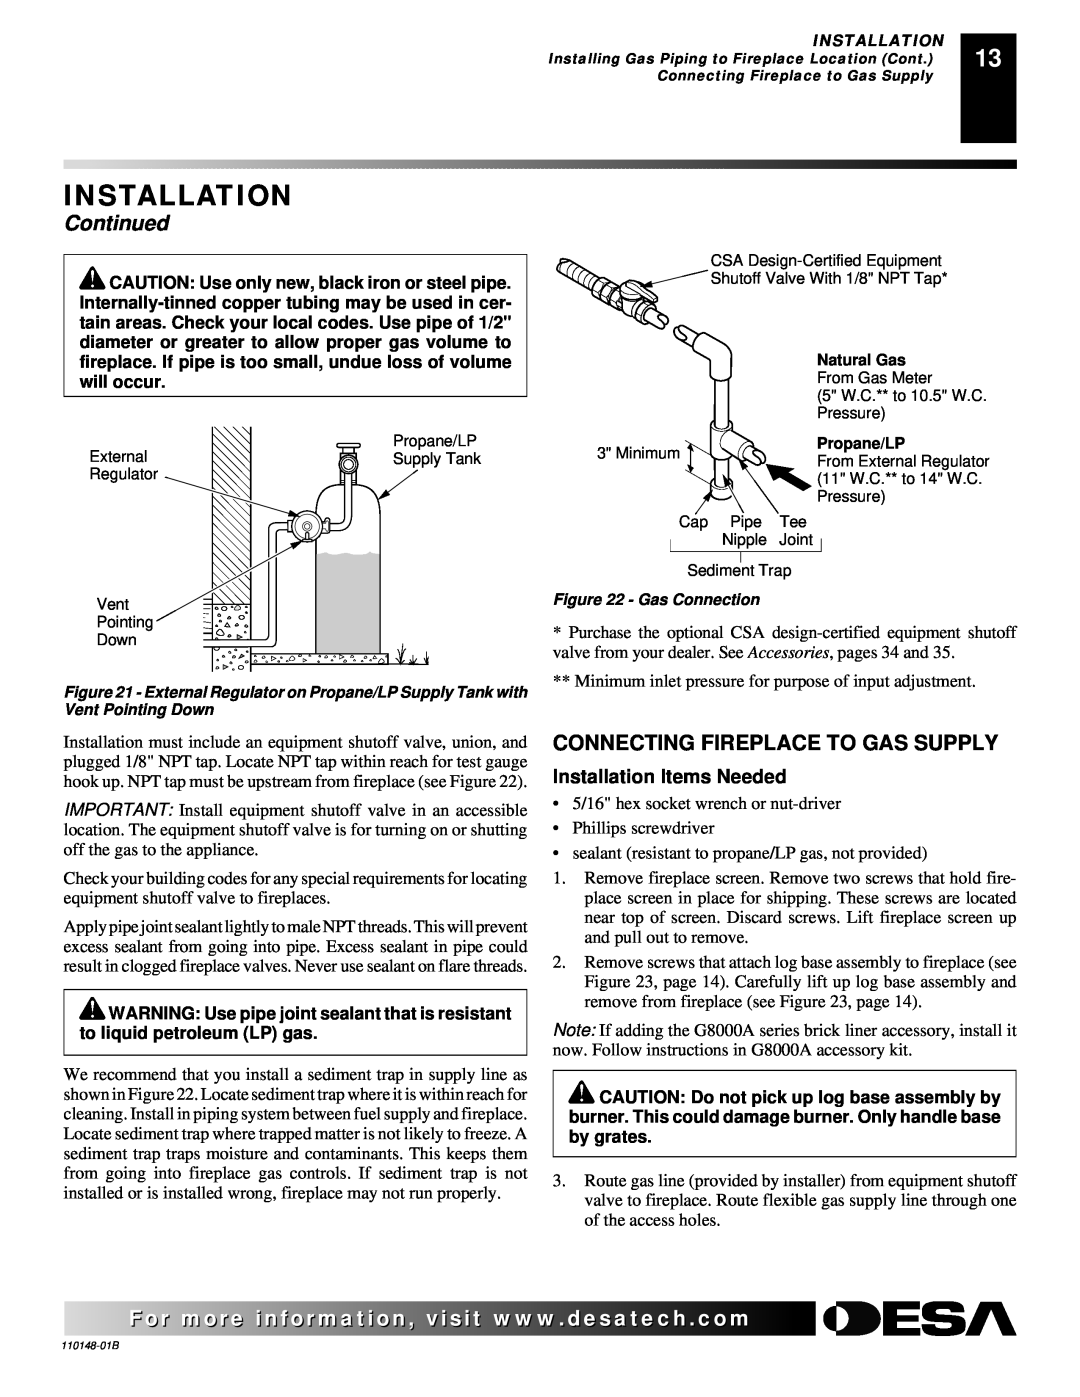 Desa FPVF33NRA, YGF33PRB installation manual Connecting Fireplace To Gas Supply, Continued, Installation Items Needed 